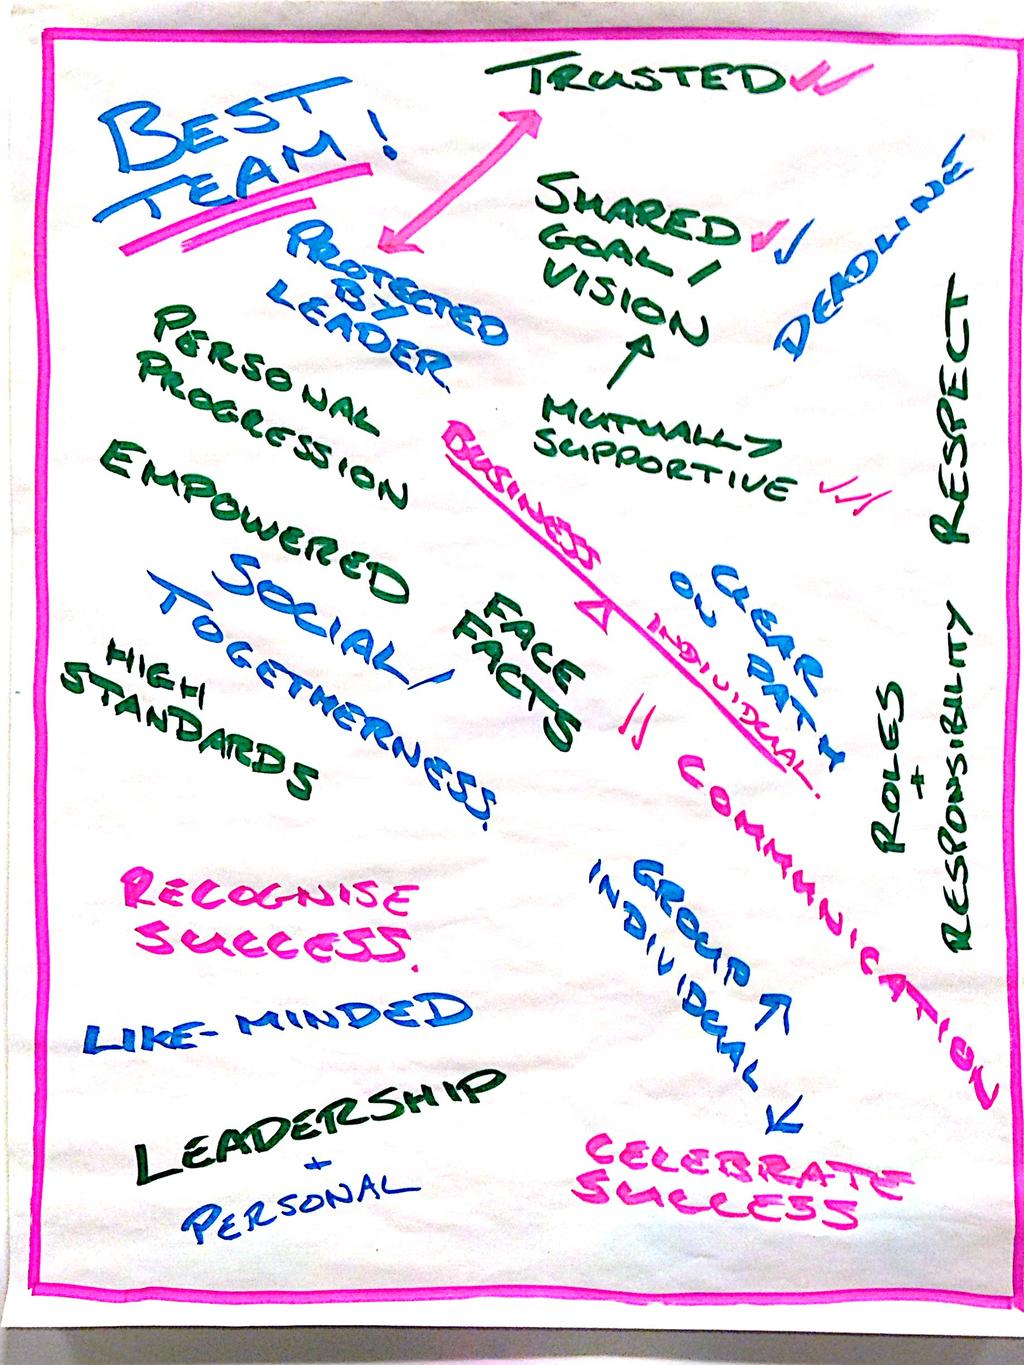 High Performing Teams As part of the Check-In for the day I asked you to reflect upon and share your experiences of High Performing Teams. This highlighted a number of key things to me. 1.